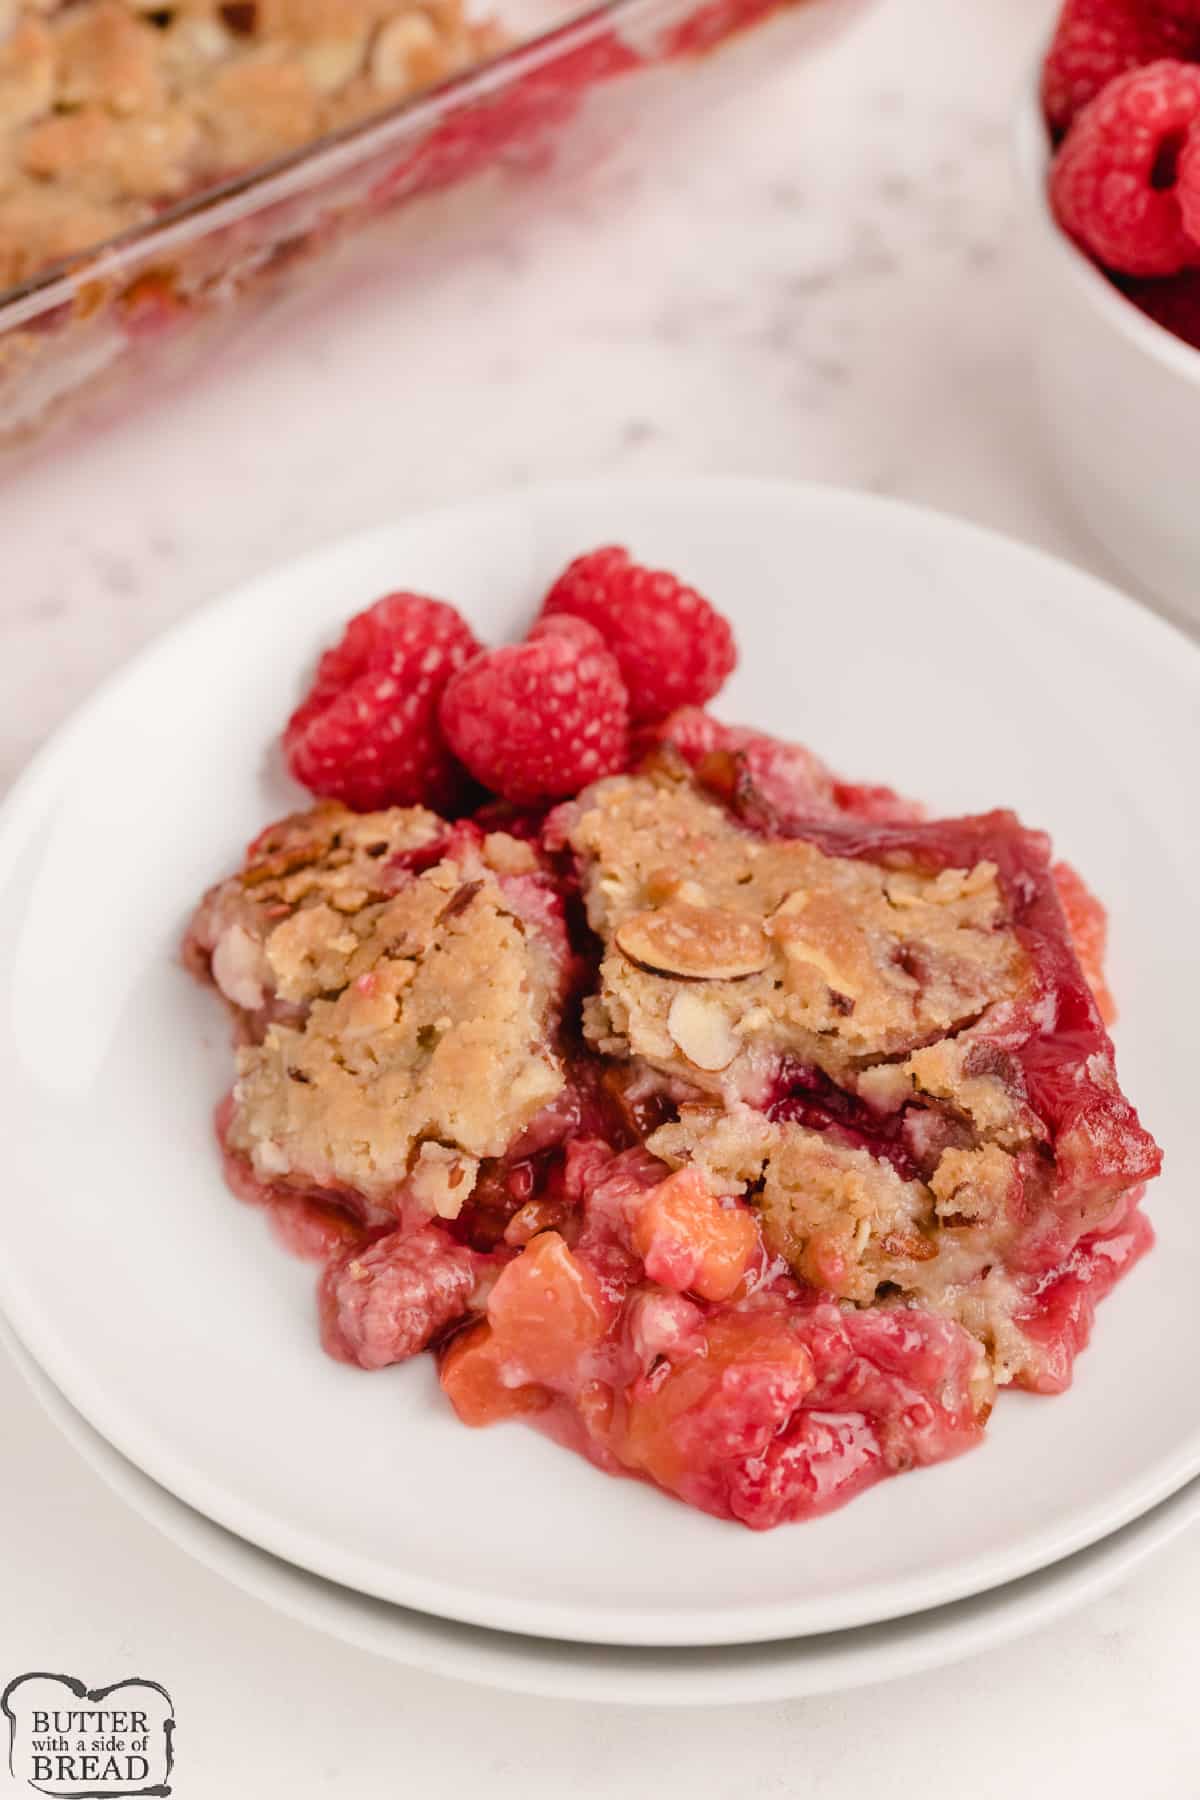 Raspberry Peach Crumble made with fresh peaches and raspberries covered with a sweet, crunchy almond topping. Delicious peach dessert that only takes a few minutes to prepare! 